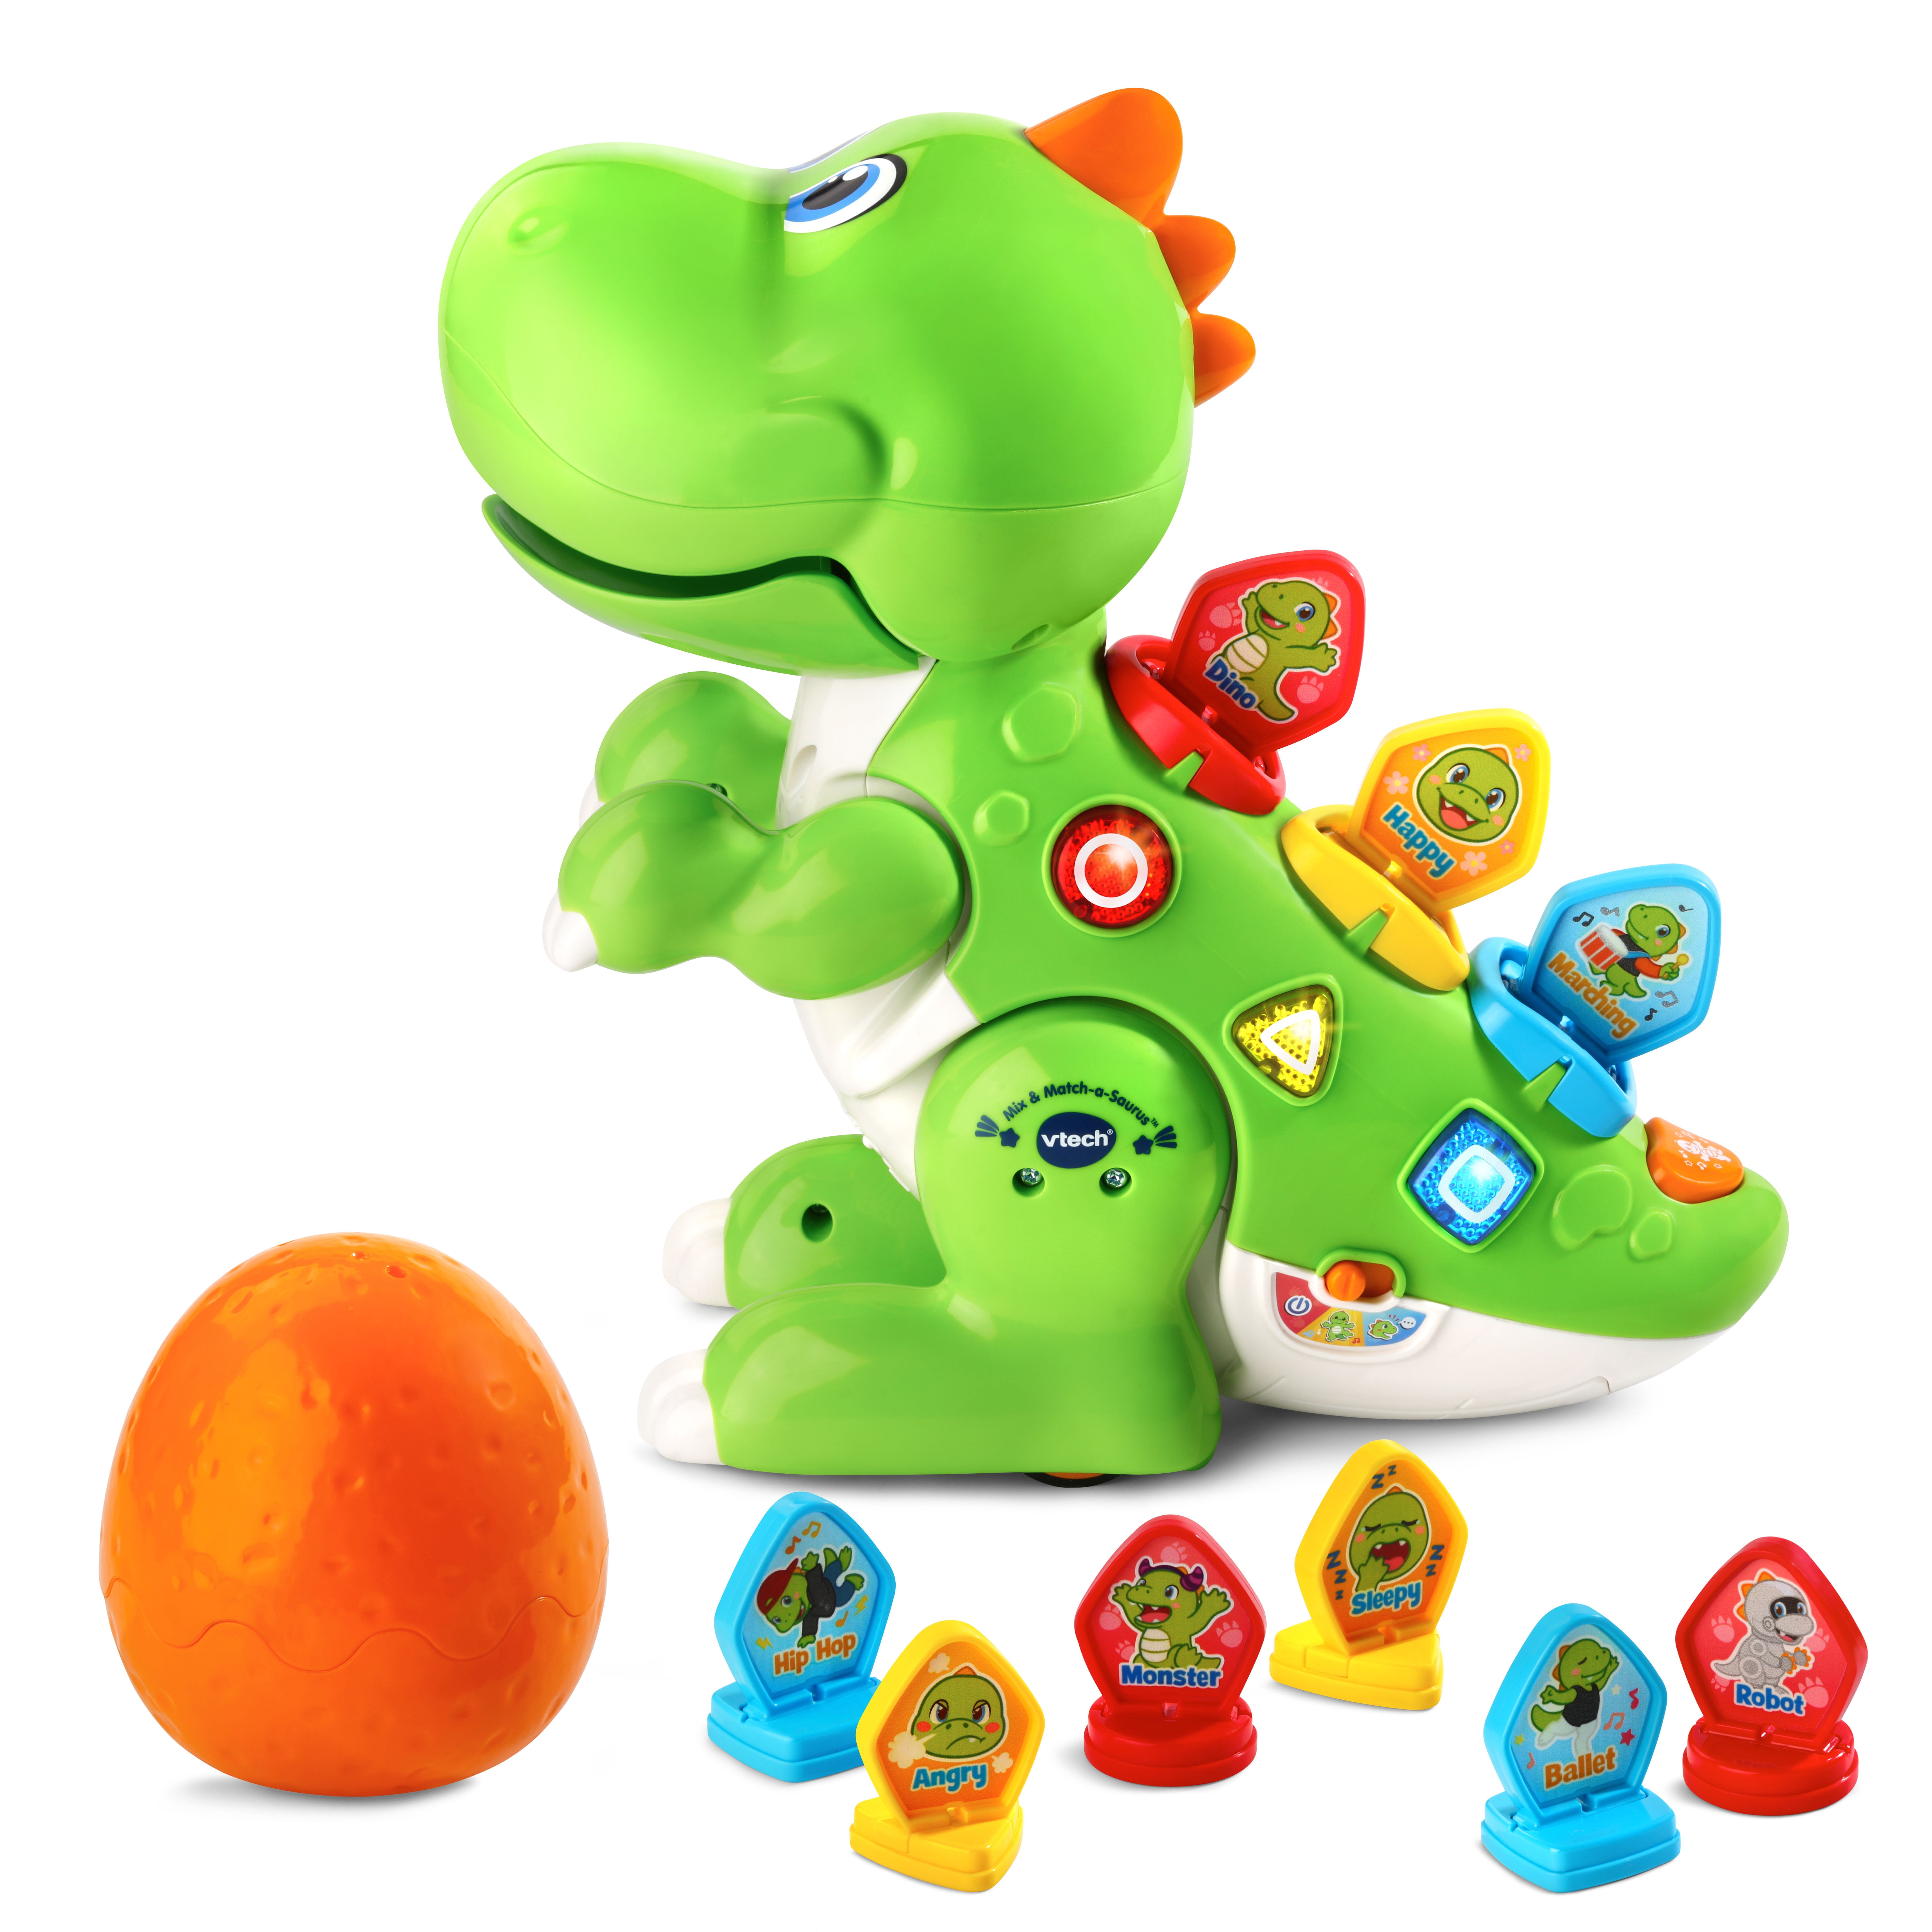 VTech Mix and Match-a-saurus Dinosaur Learning Toy for Kids for sale online 